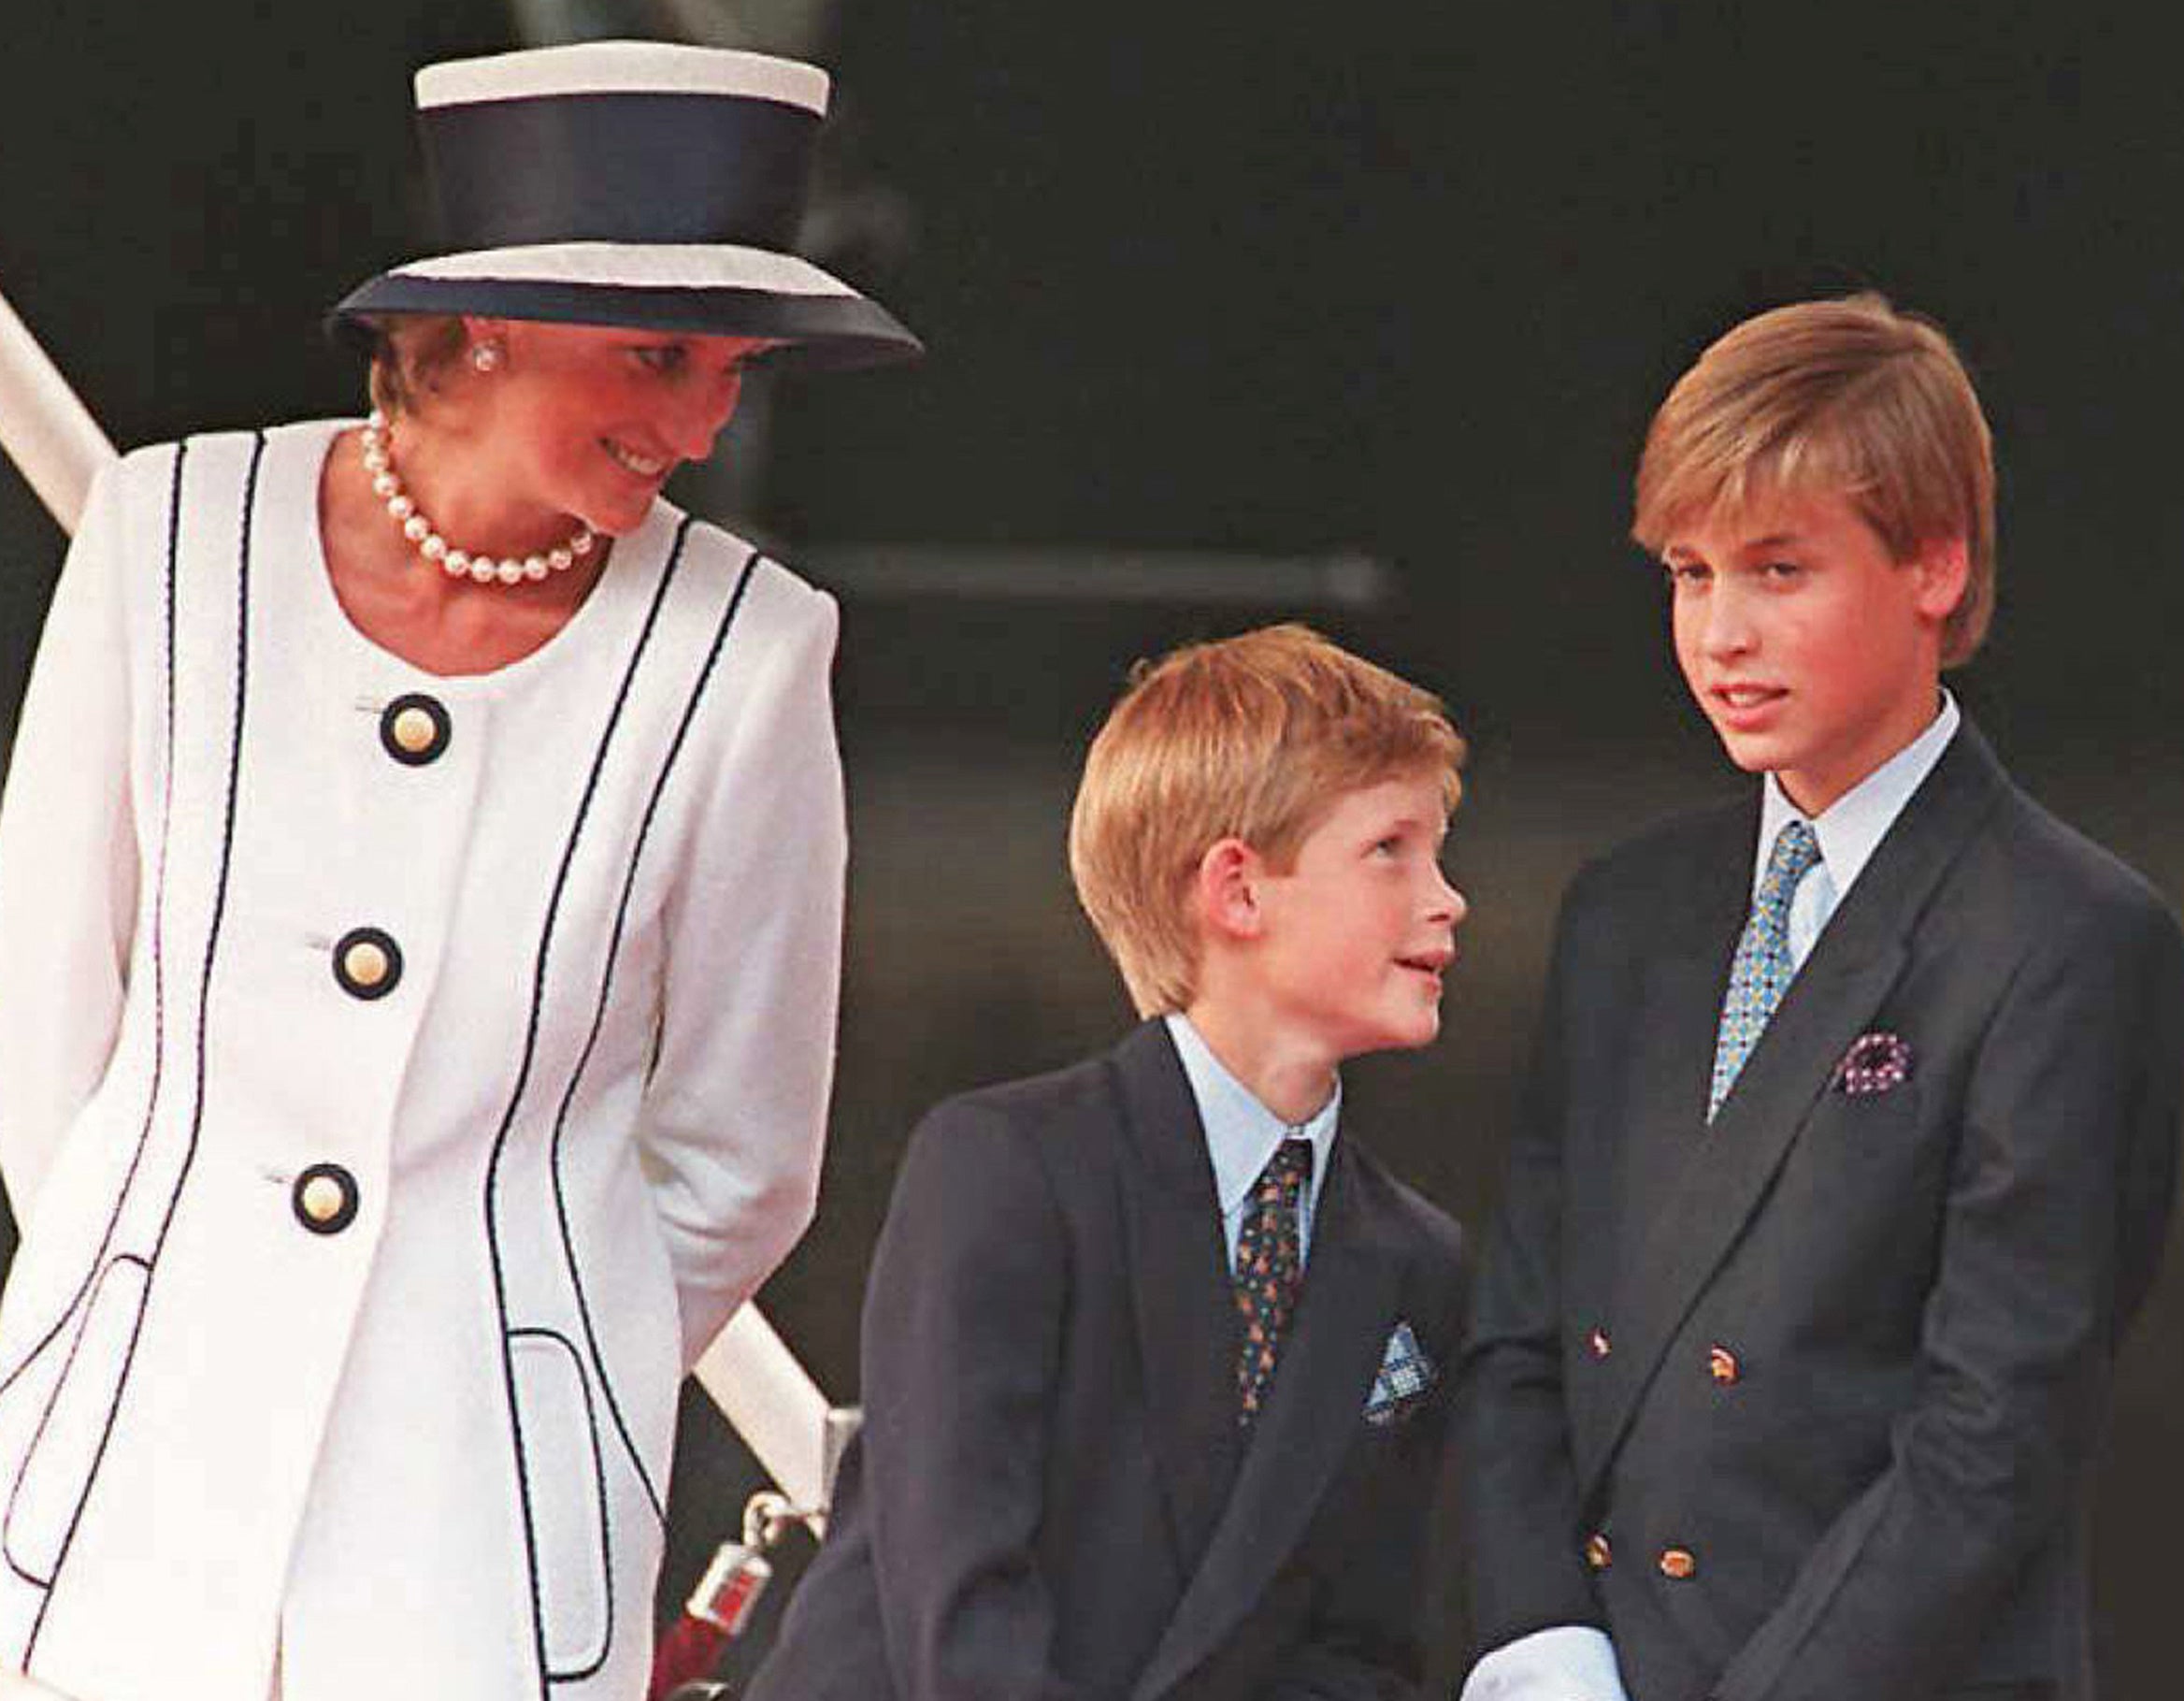 The palace bowed to public pressure after the death of Diana